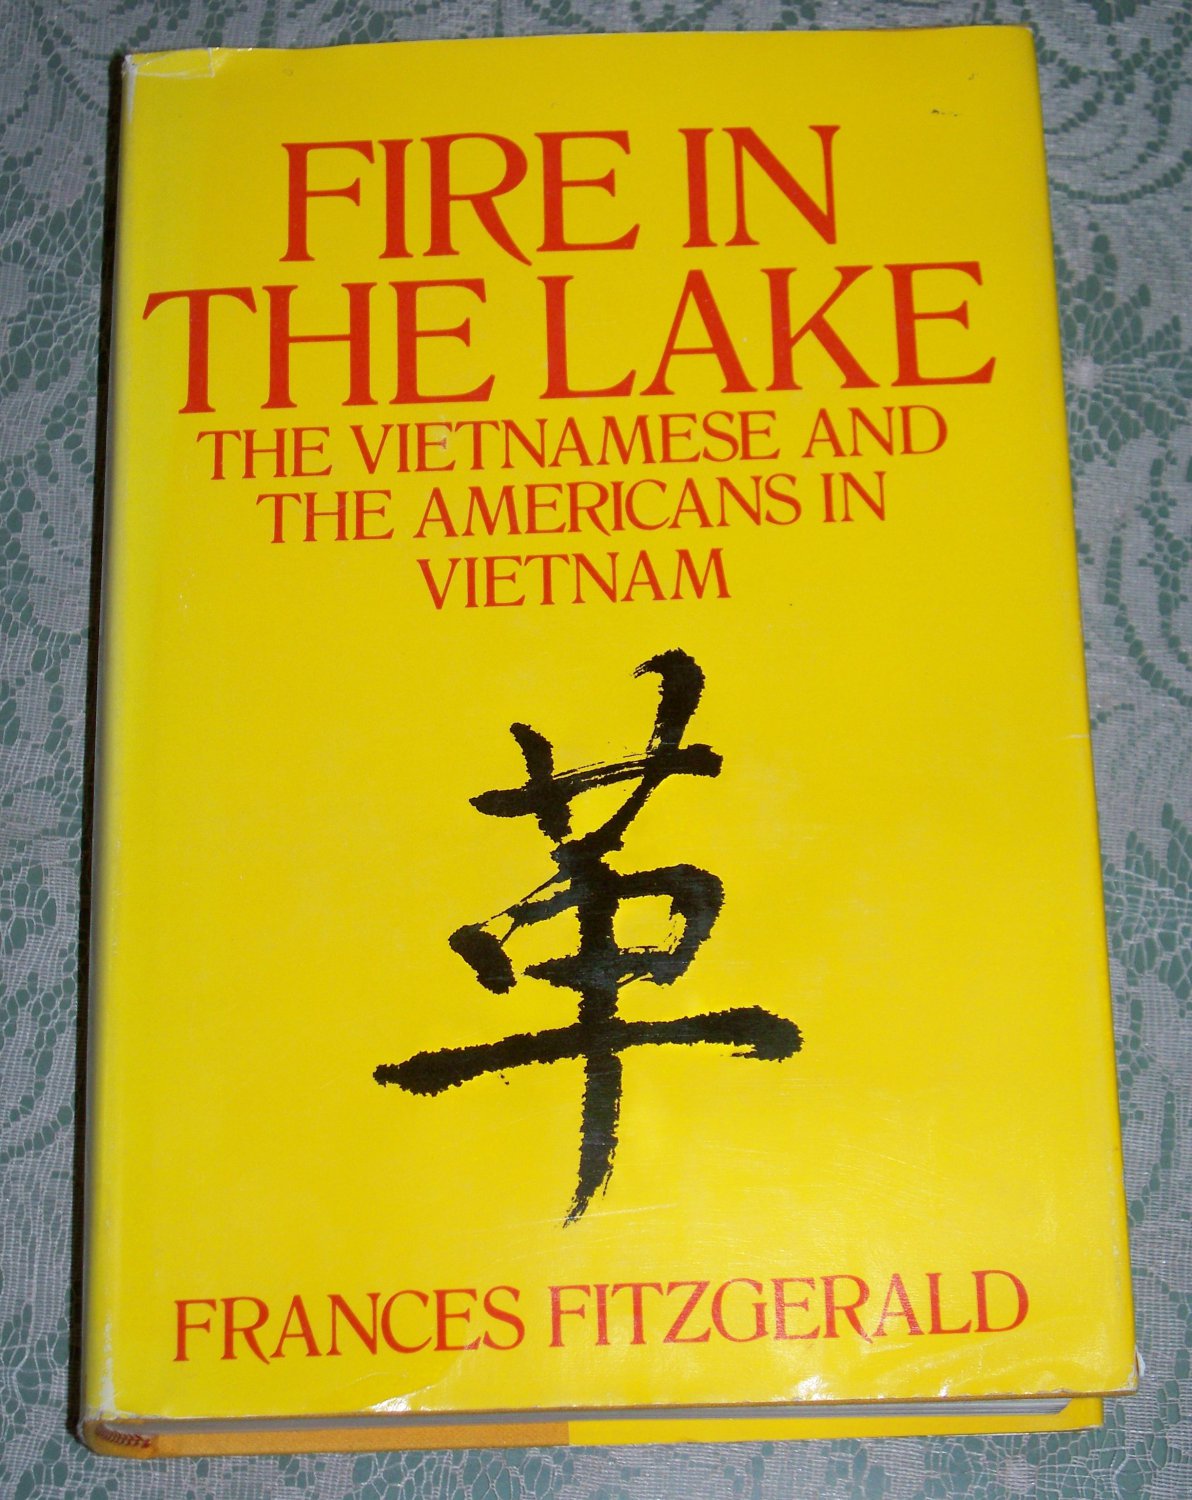 fire in the lake by frances fitzgerald